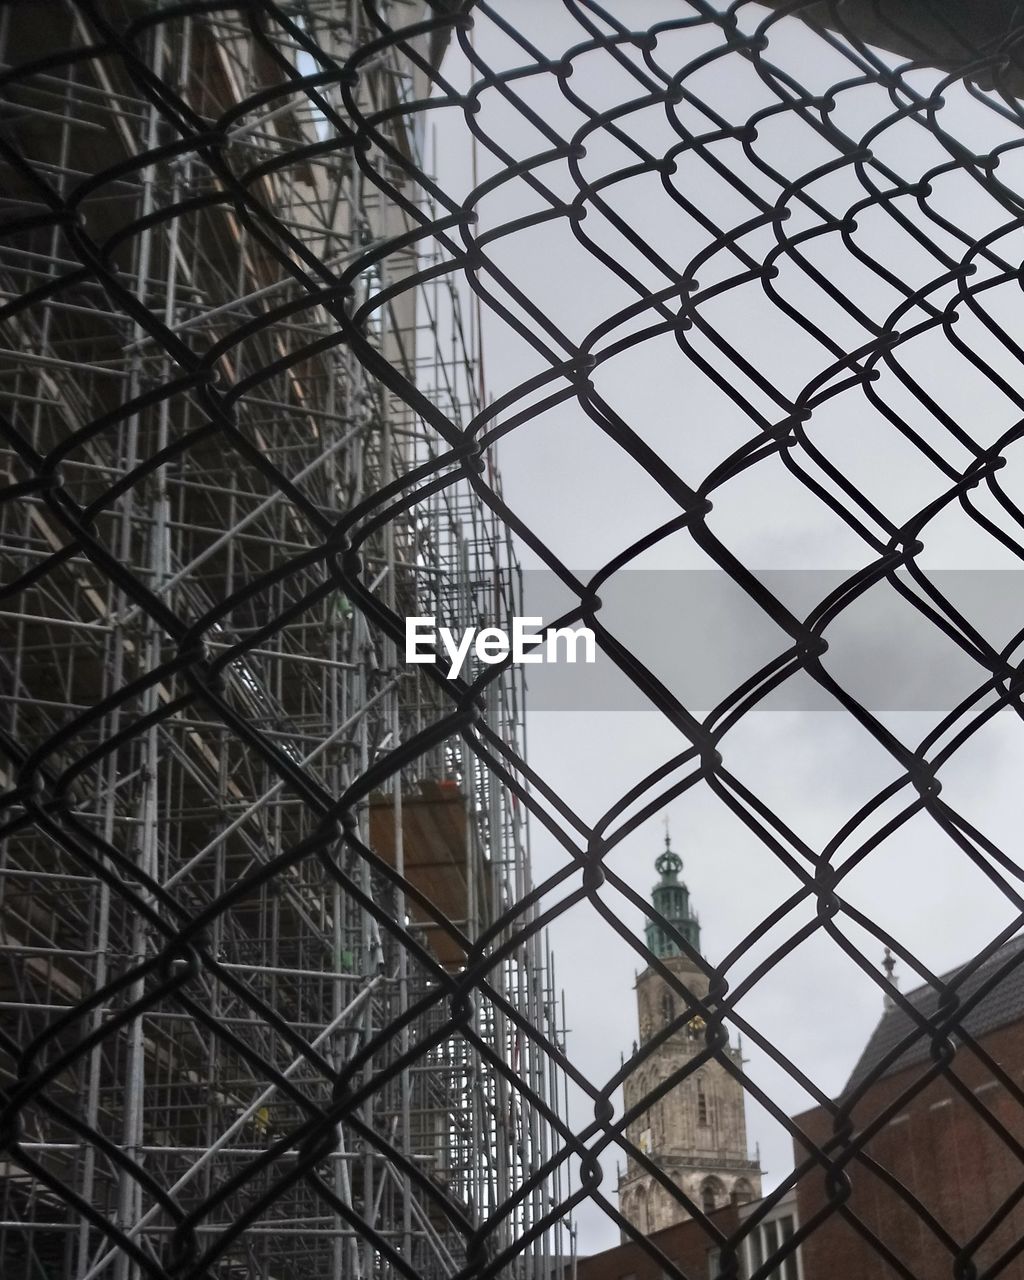 LOW ANGLE VIEW OF CHAINLINK FENCE AGAINST BUILDINGS IN CITY